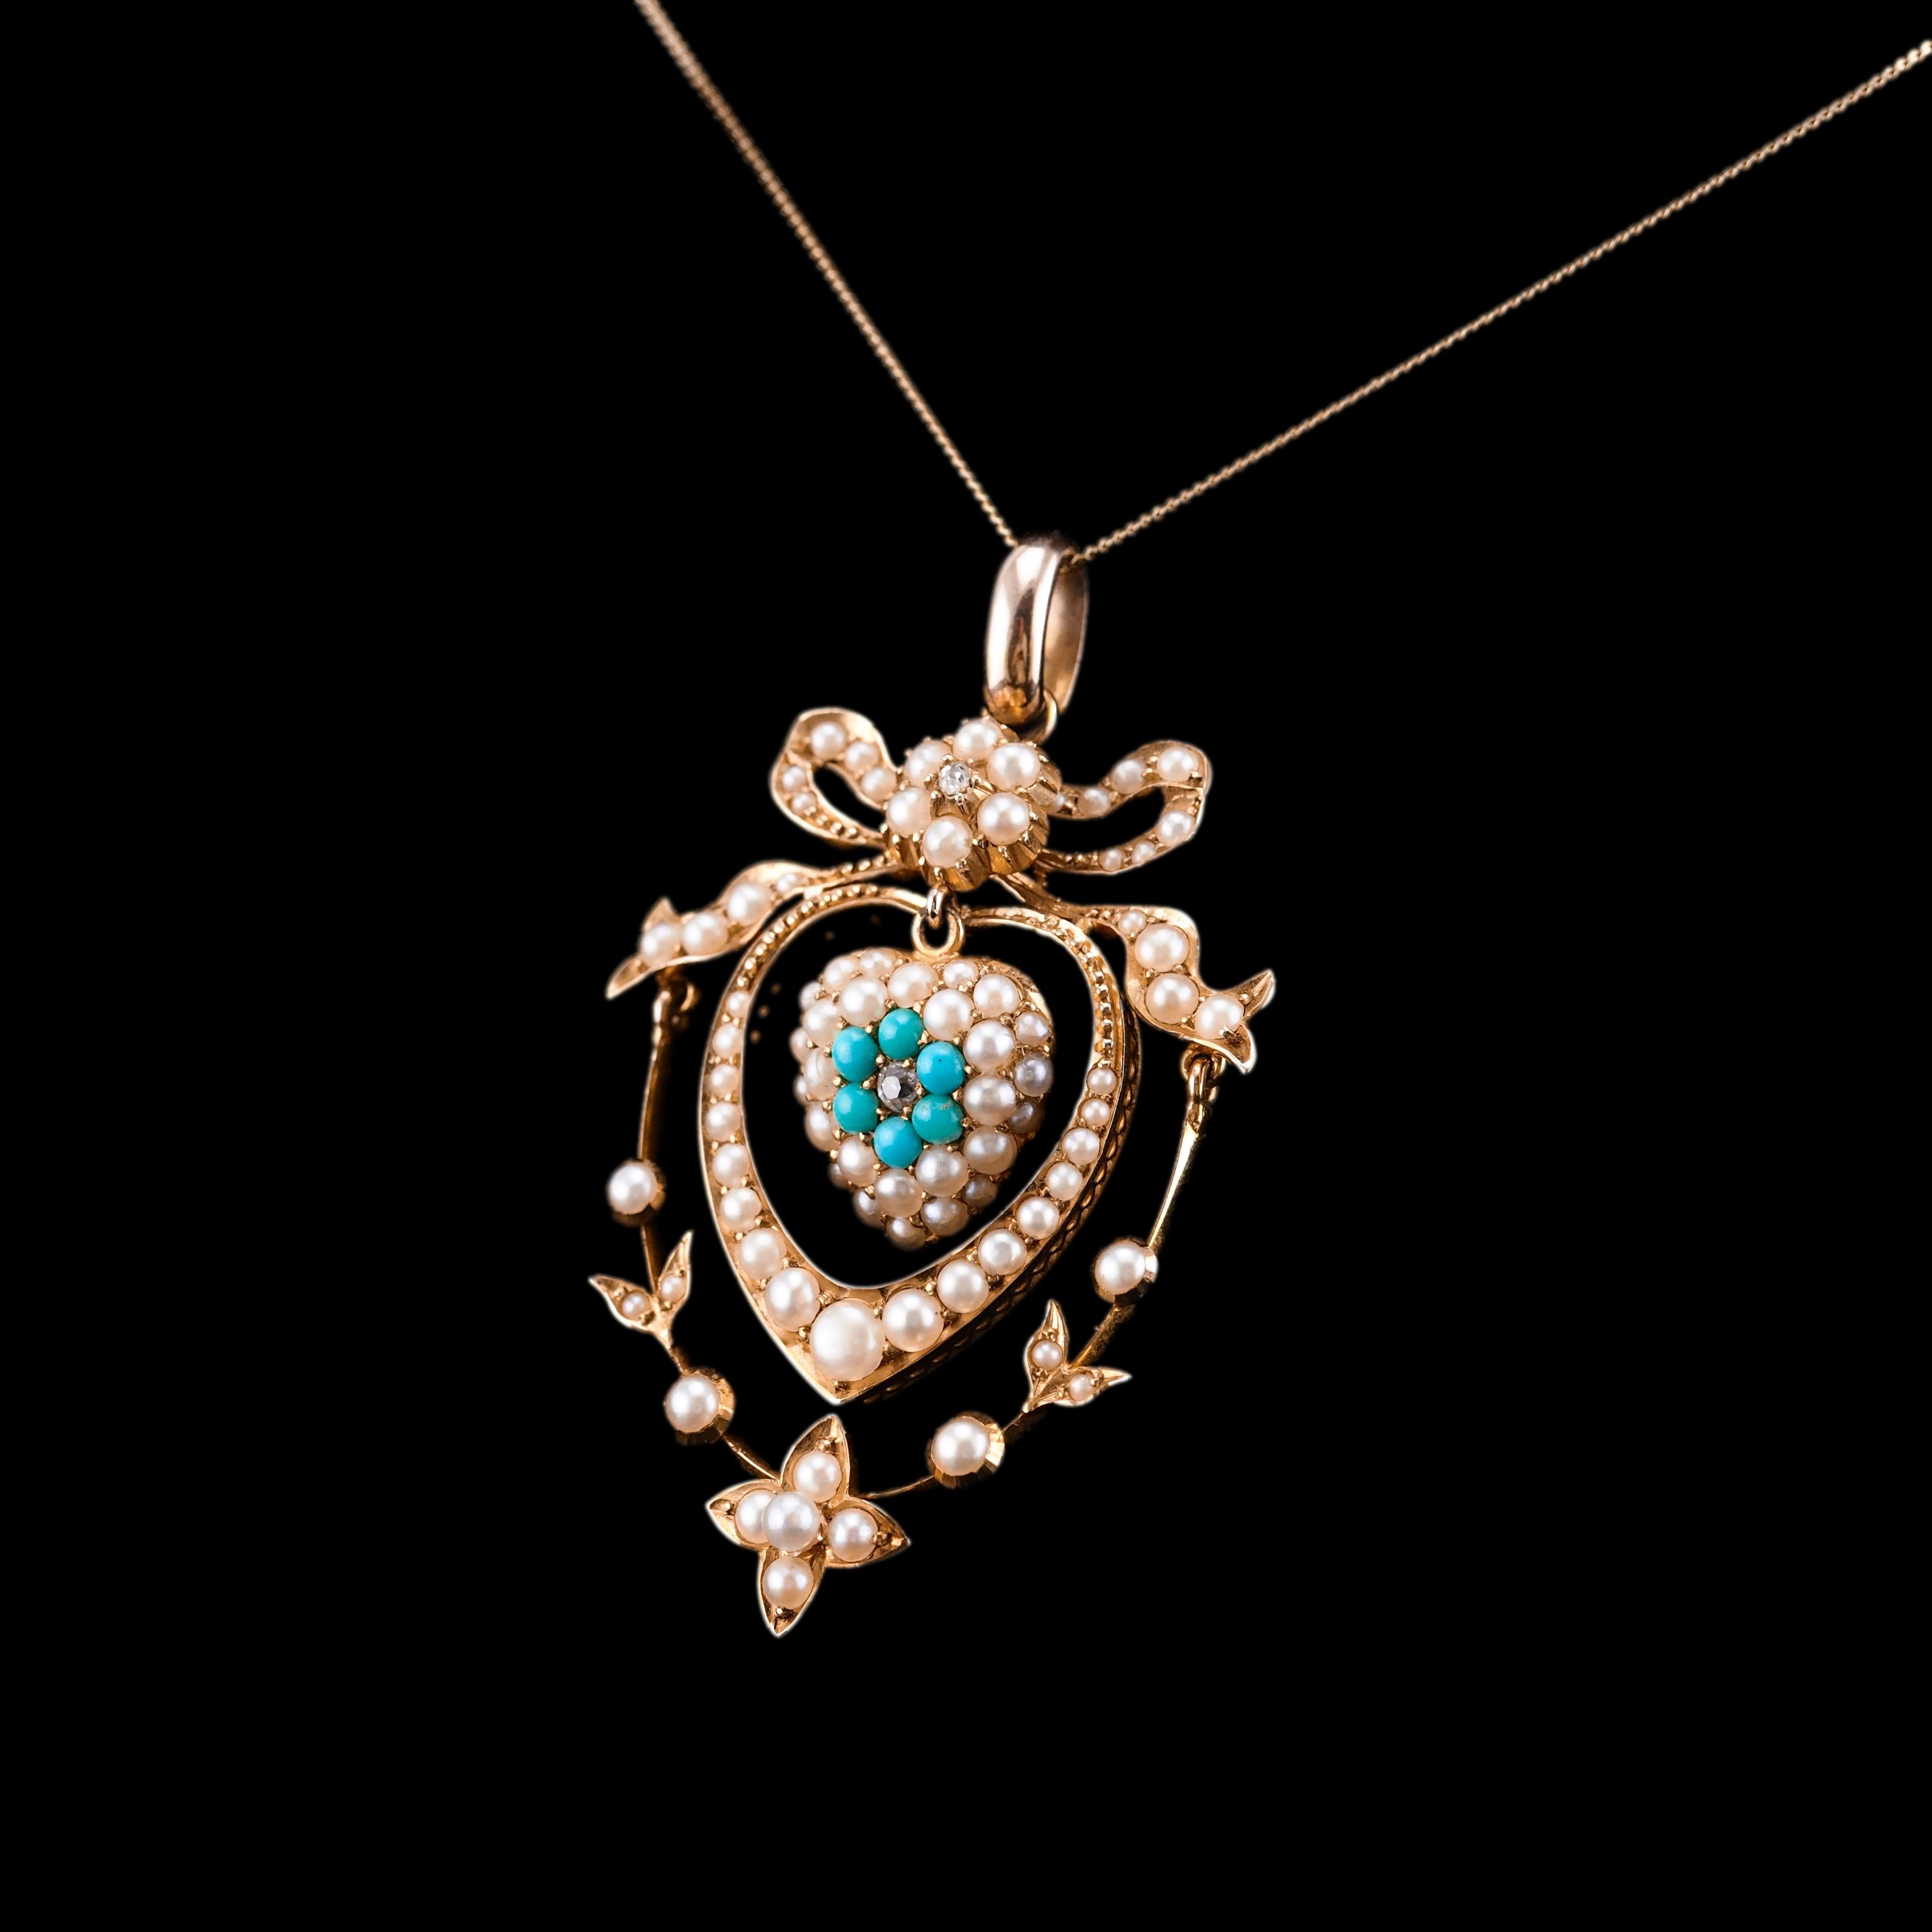 Antique Edwardian 15K Gold Turquoise Diamond & Seed Pearl Pendant Necklace c1910 For Sale 9